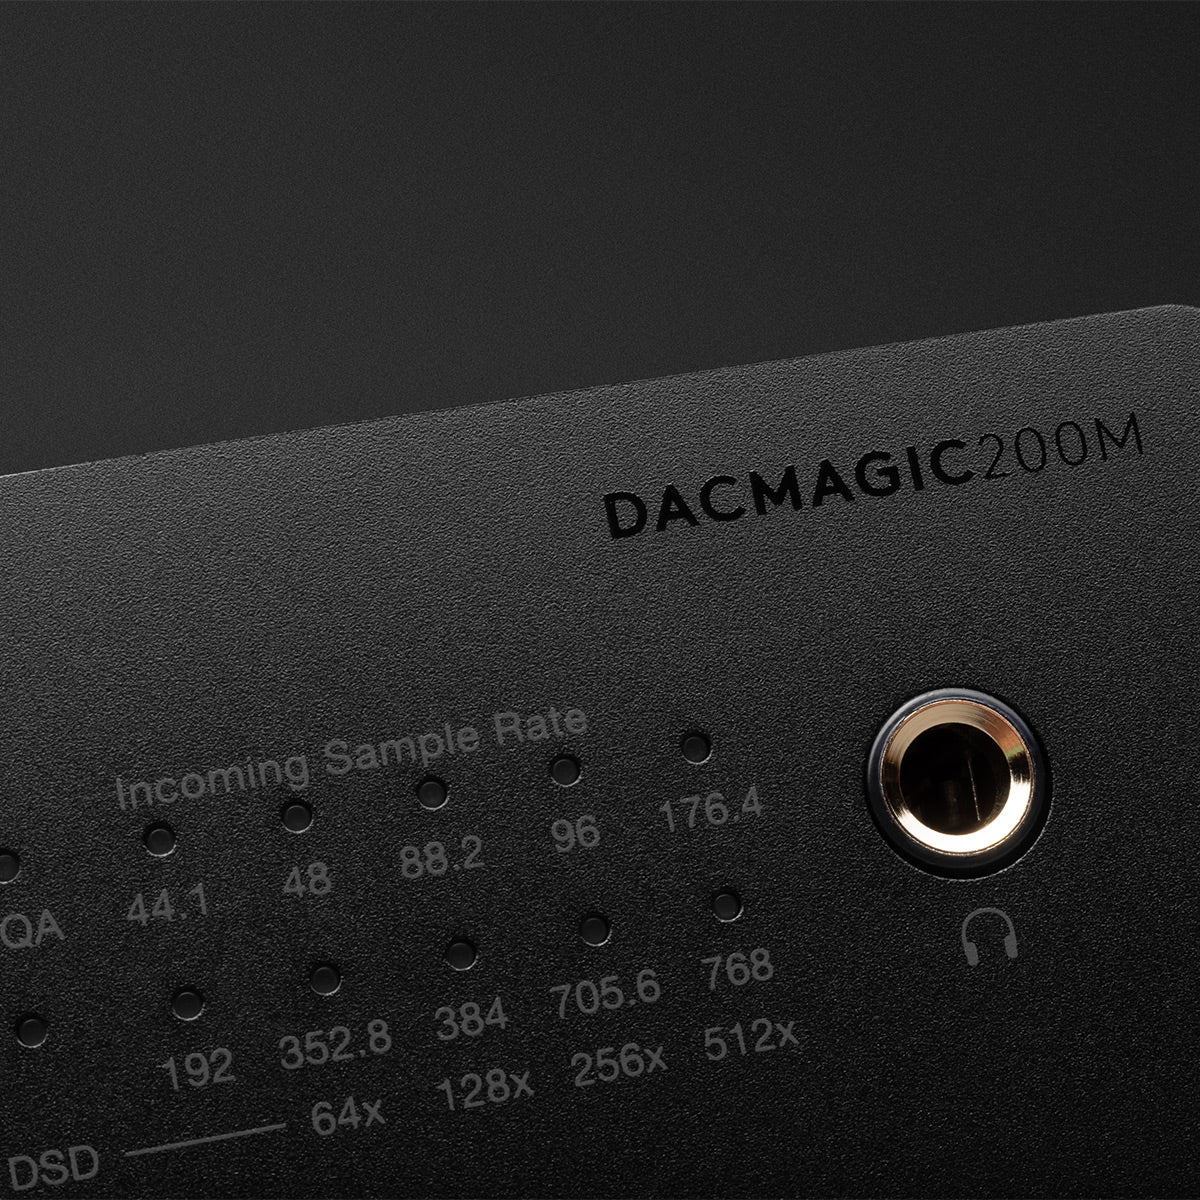 Cambridge Audio DacMagic 200M Digital-to-Audio Converter and Preamplifier with Bluetooth aptX (Limited Edition Black)